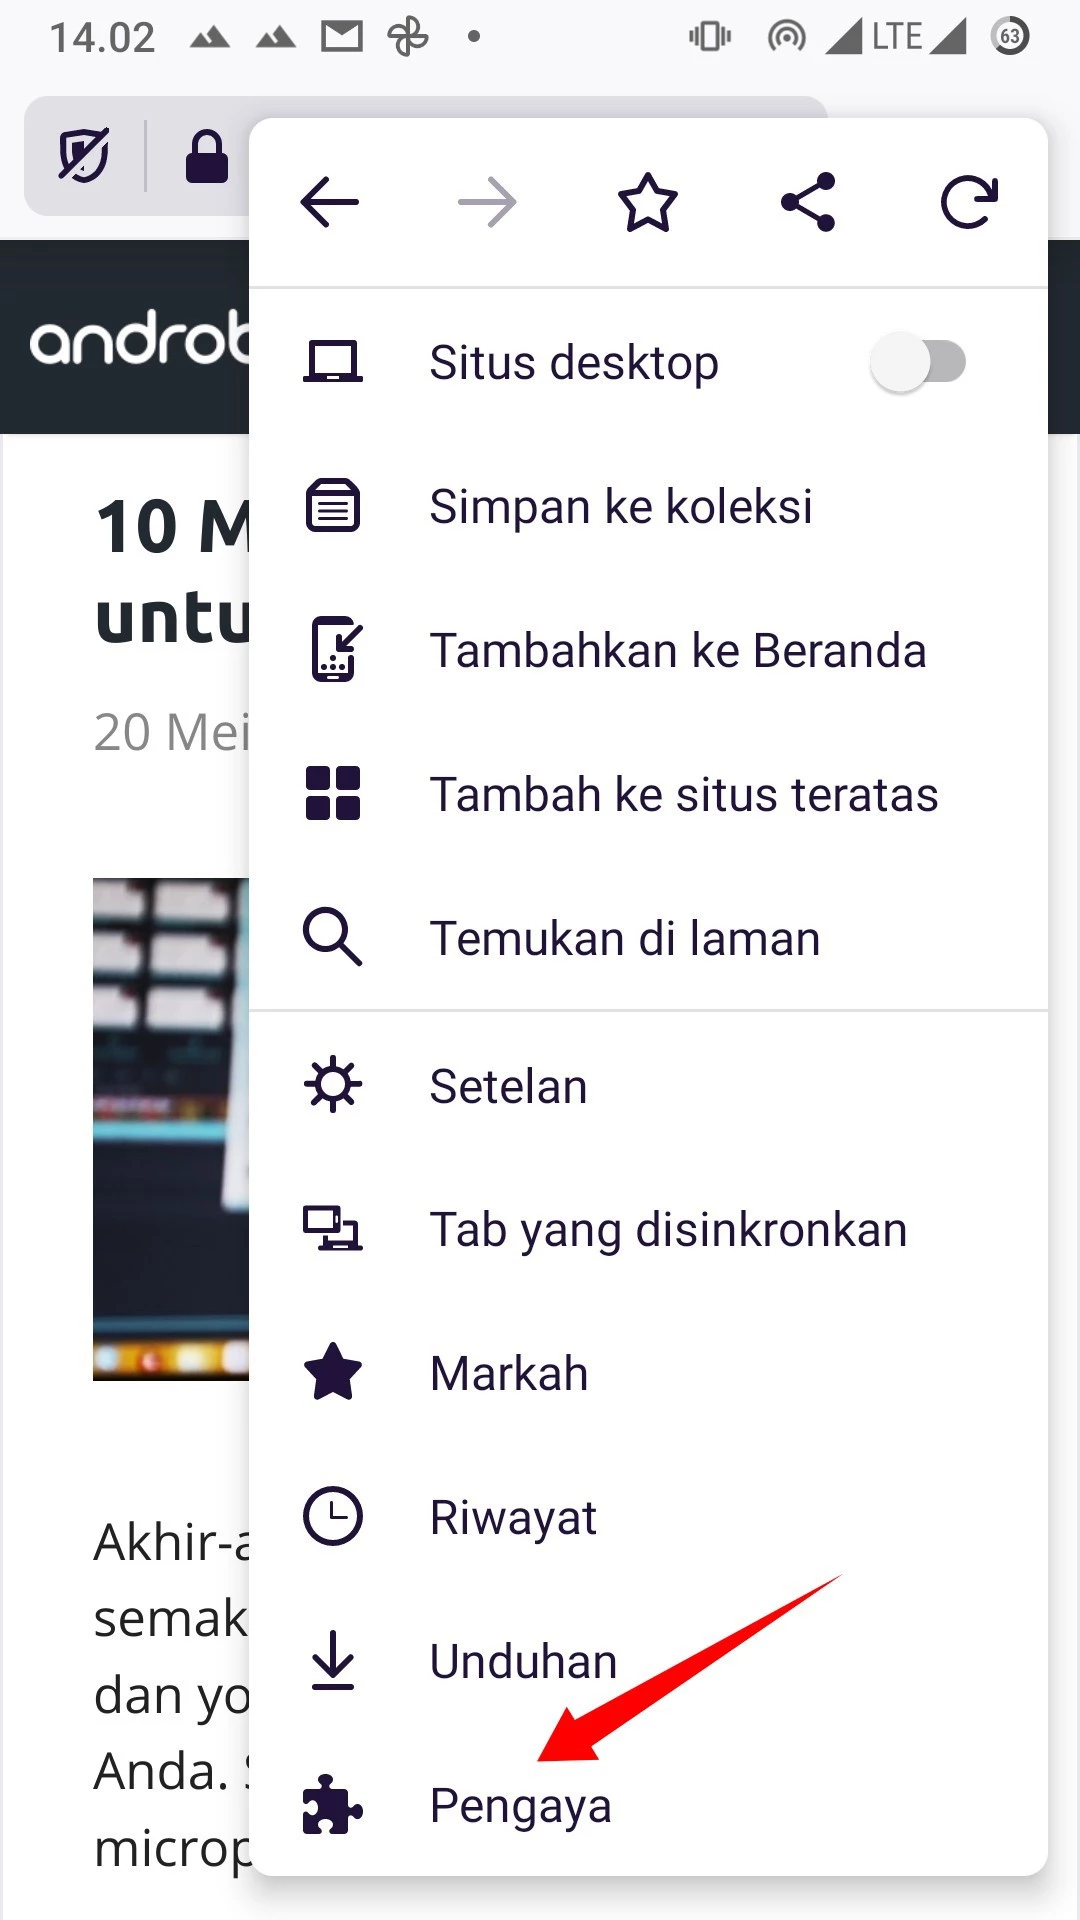 Cara Pasang Add-on di Firefox Android by Androbuntu 2